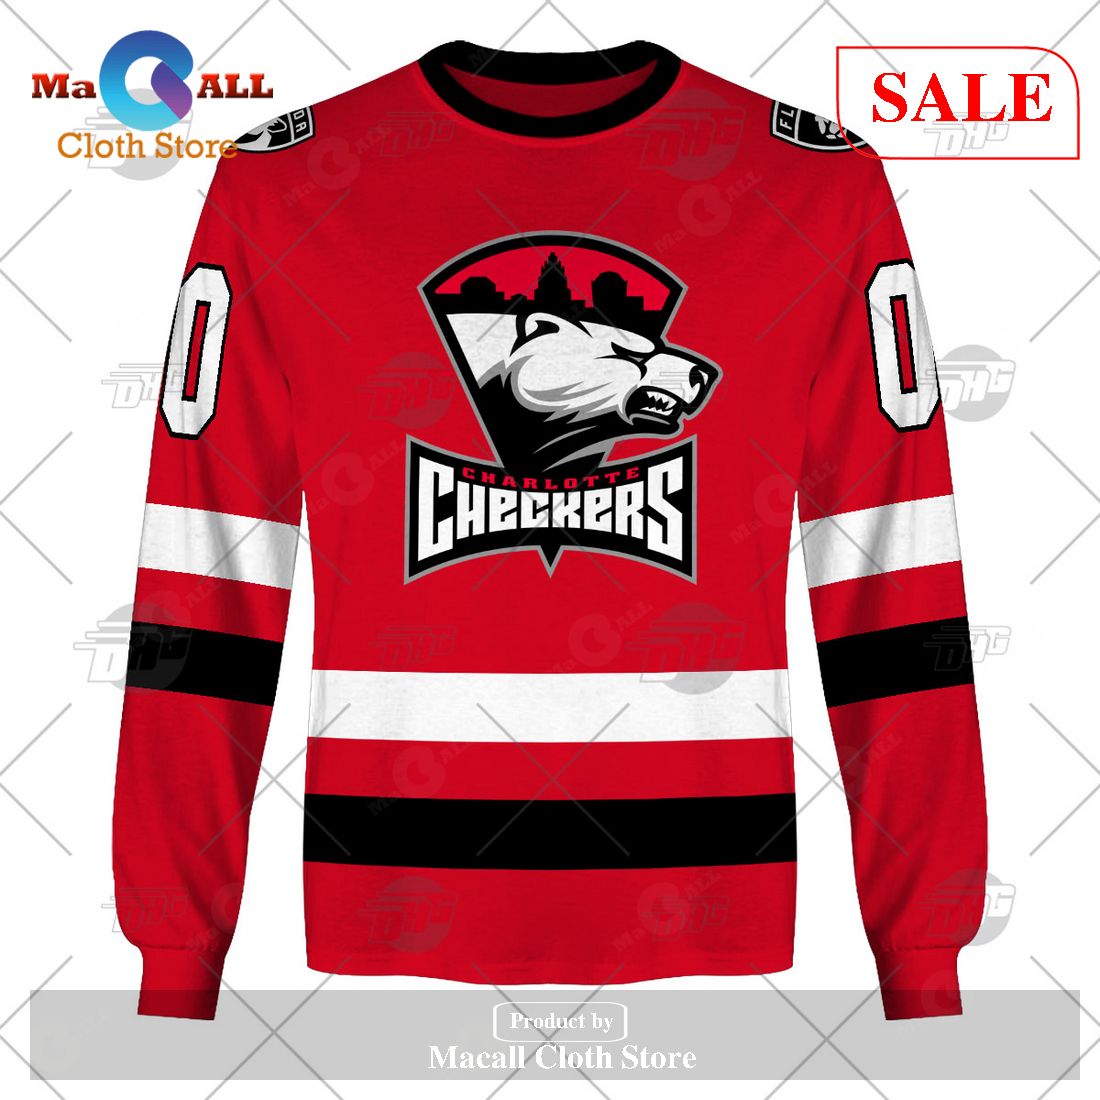 SALE] Personalized AHL Charlotte Checkers Premier Jersey Red